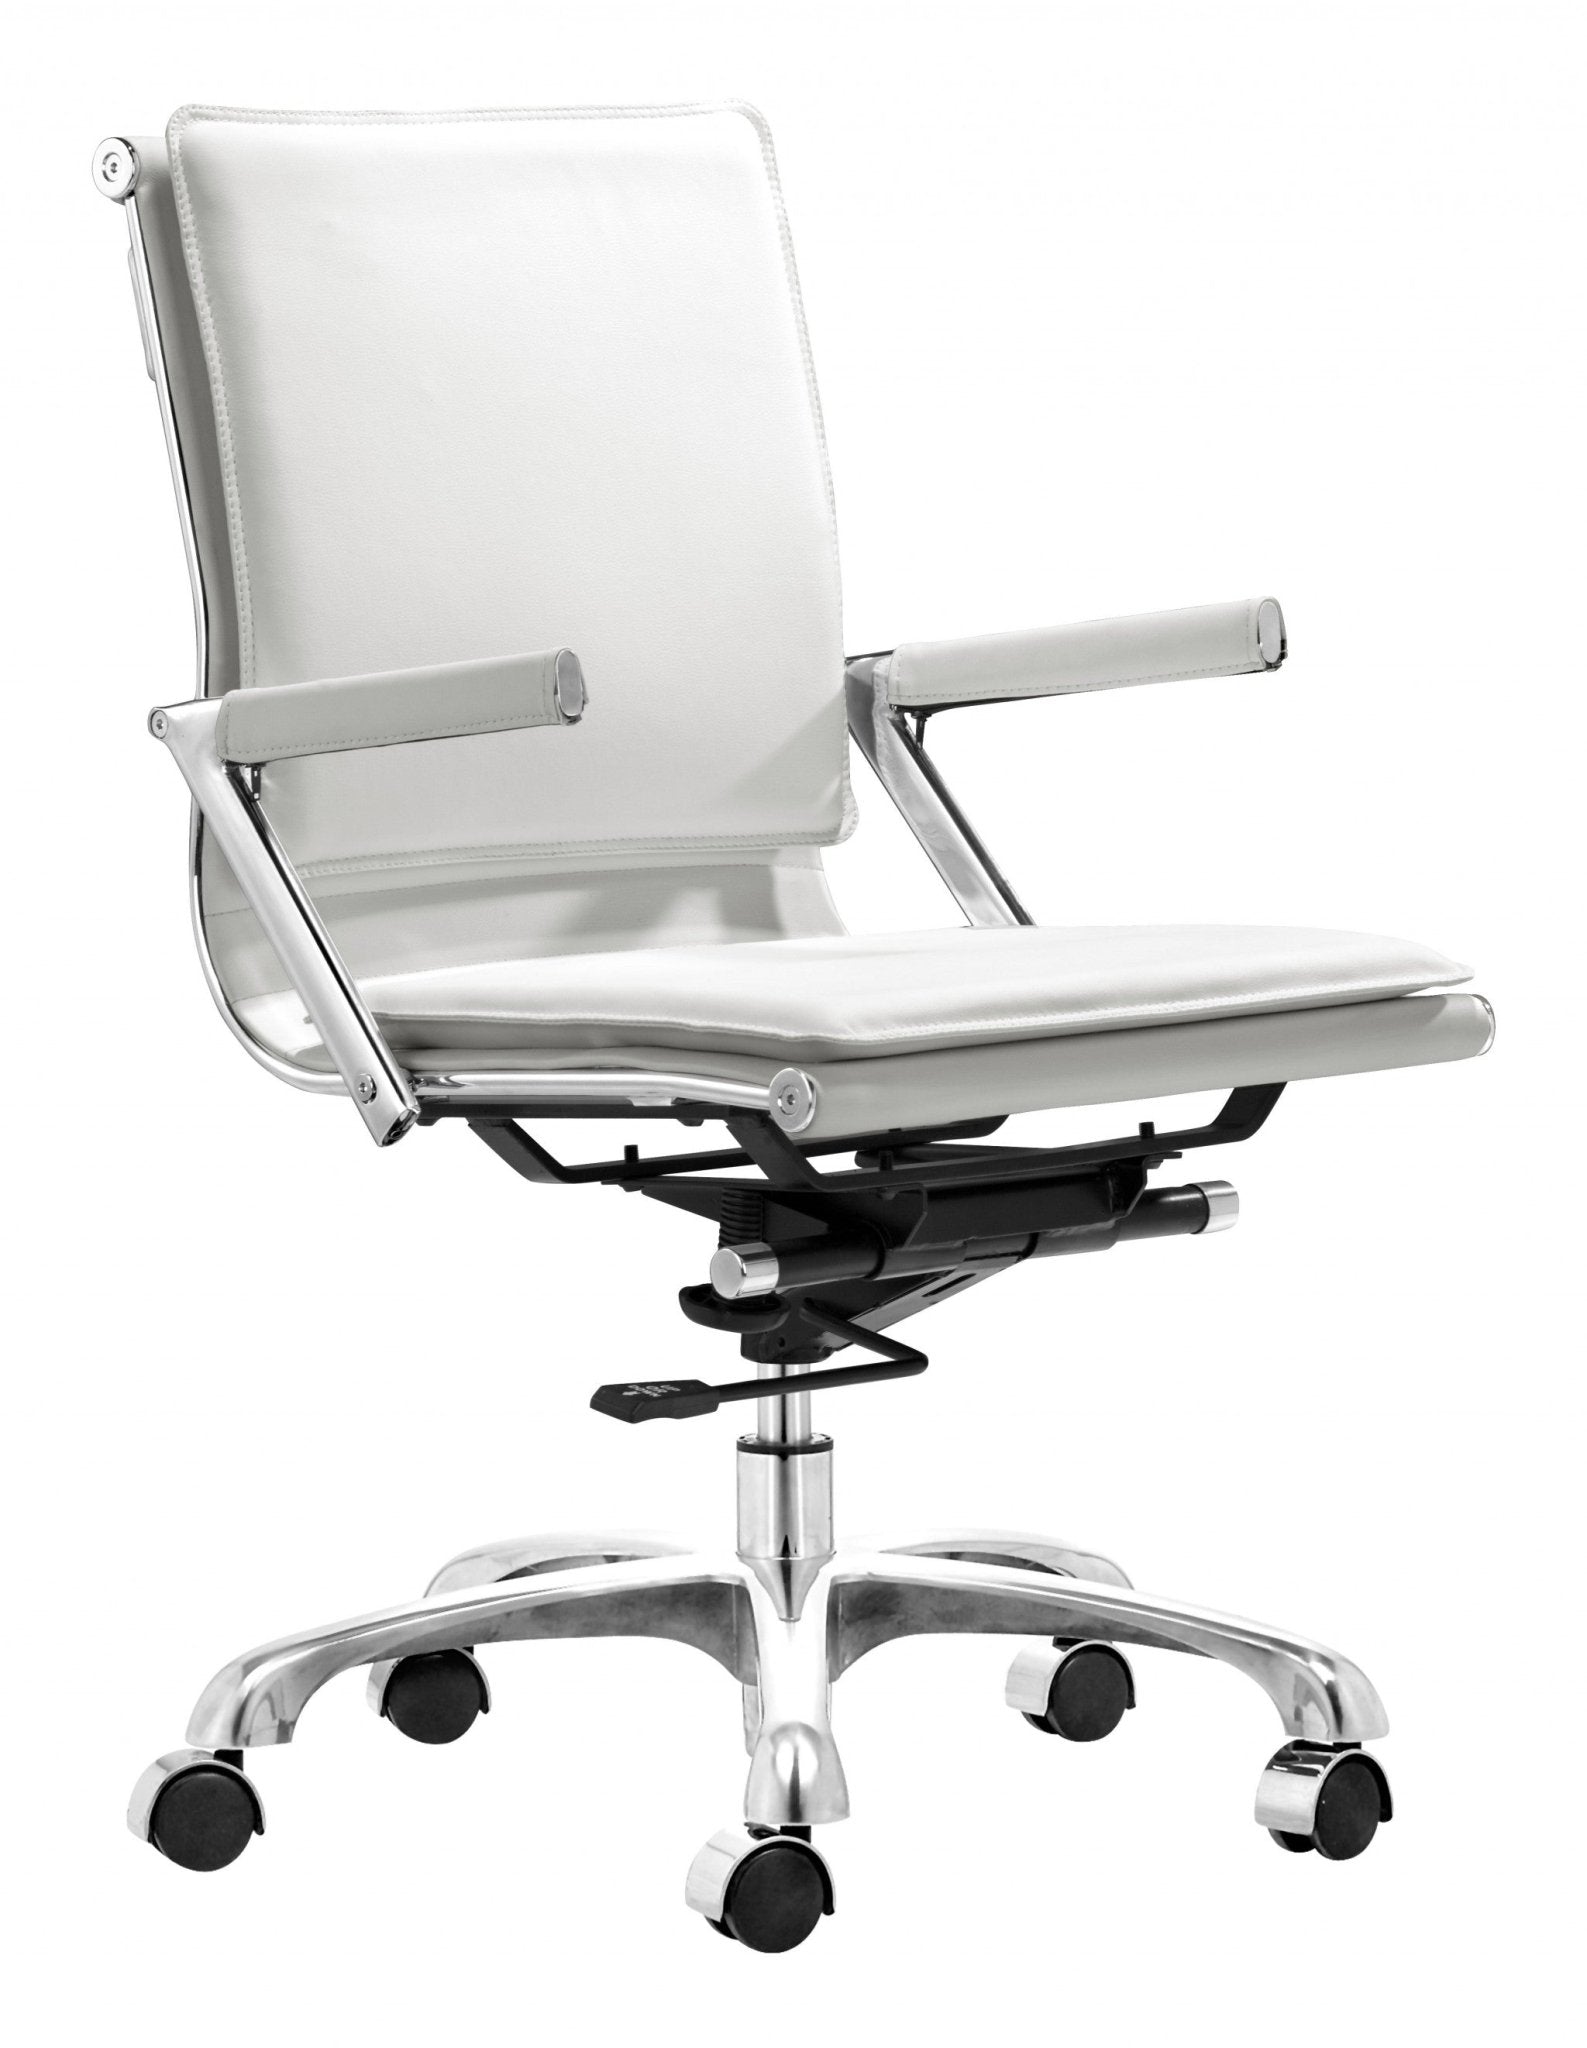 Set-of-Two-White-and-Silver-Adjustable-Swivel-Metal-Rolling-Executive-Chair-Office-Chairs